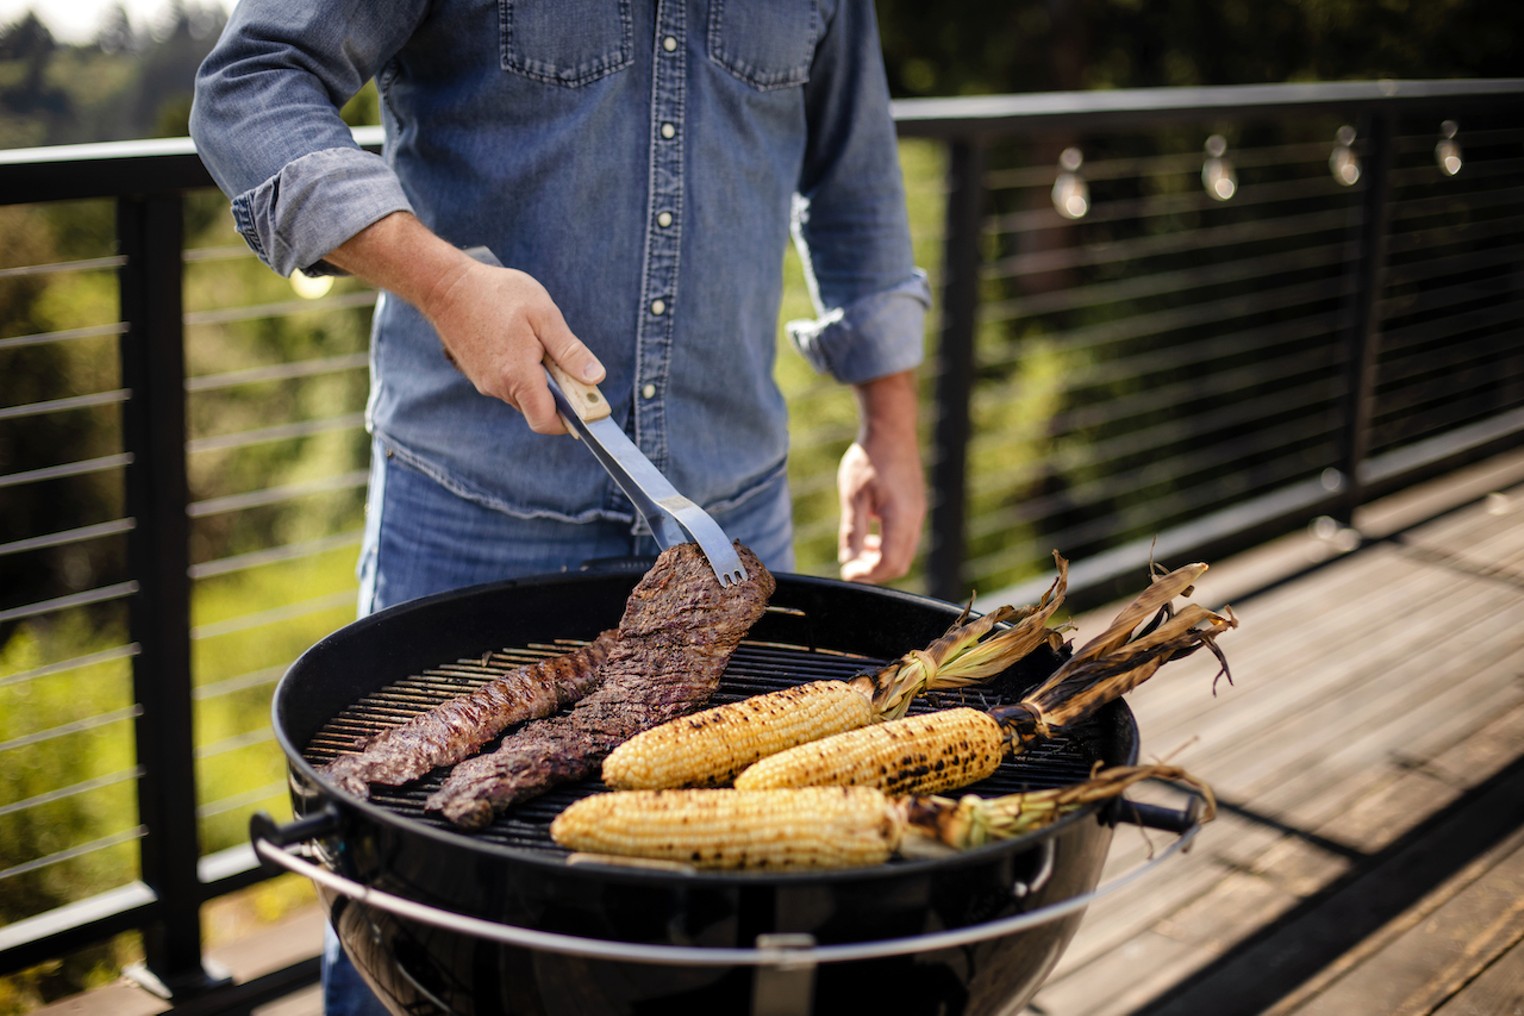 Weekend 2021 Food And Drink Specials, Cowboy Fire Pit Grill Sam’s Club